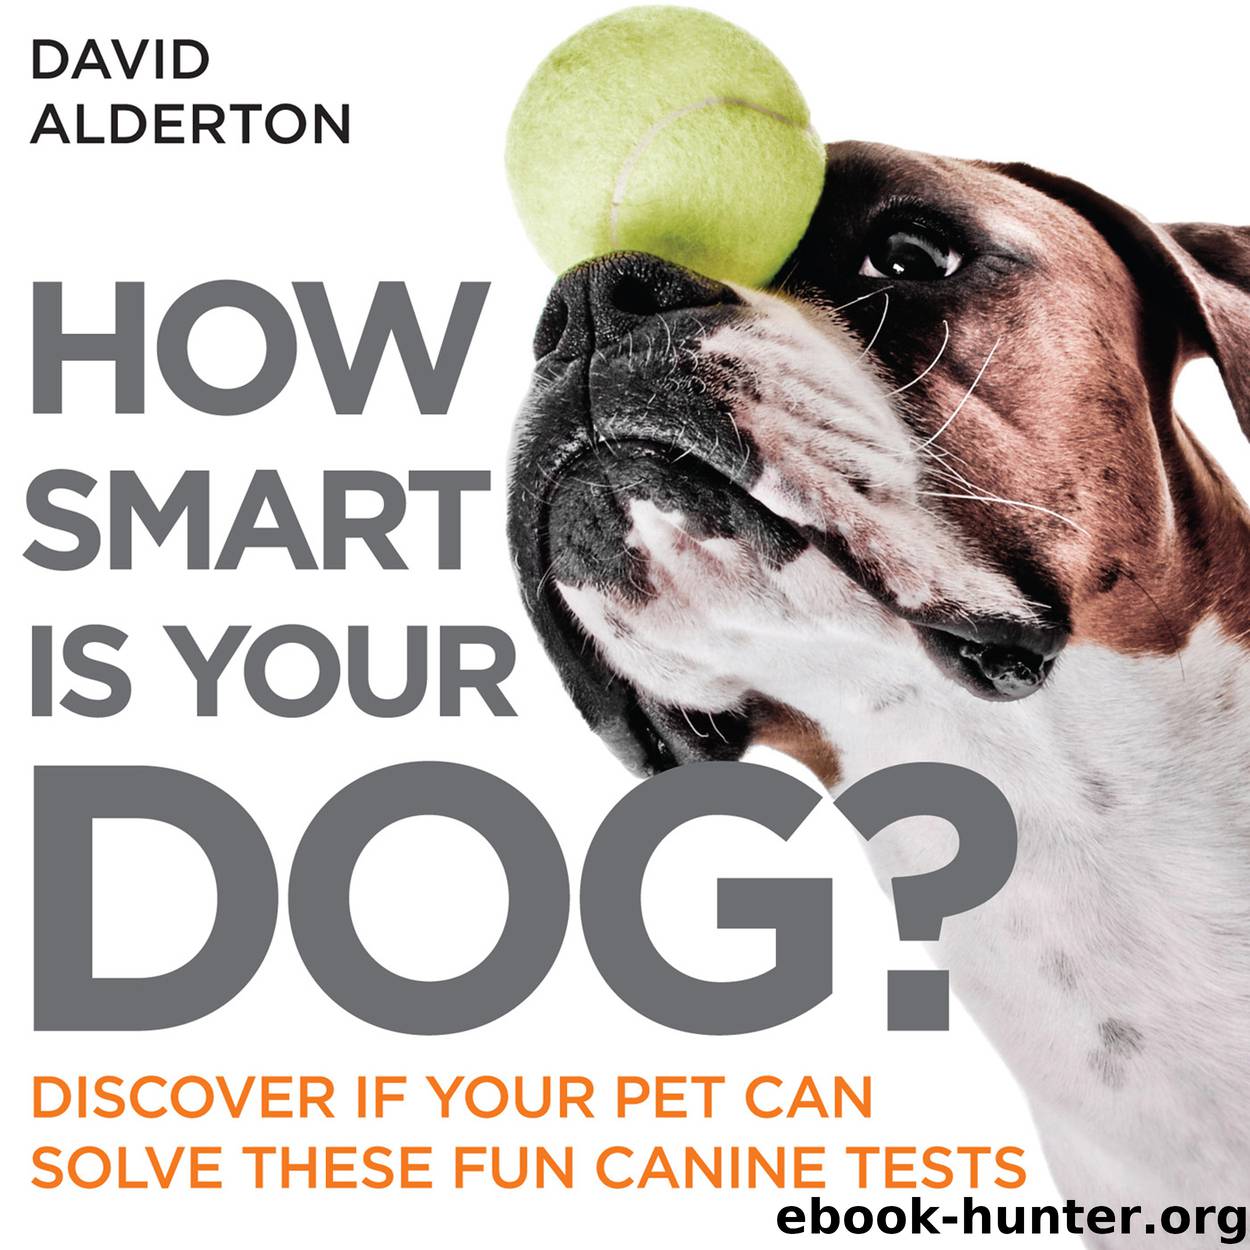 How Smart Is Your Dog? by Author